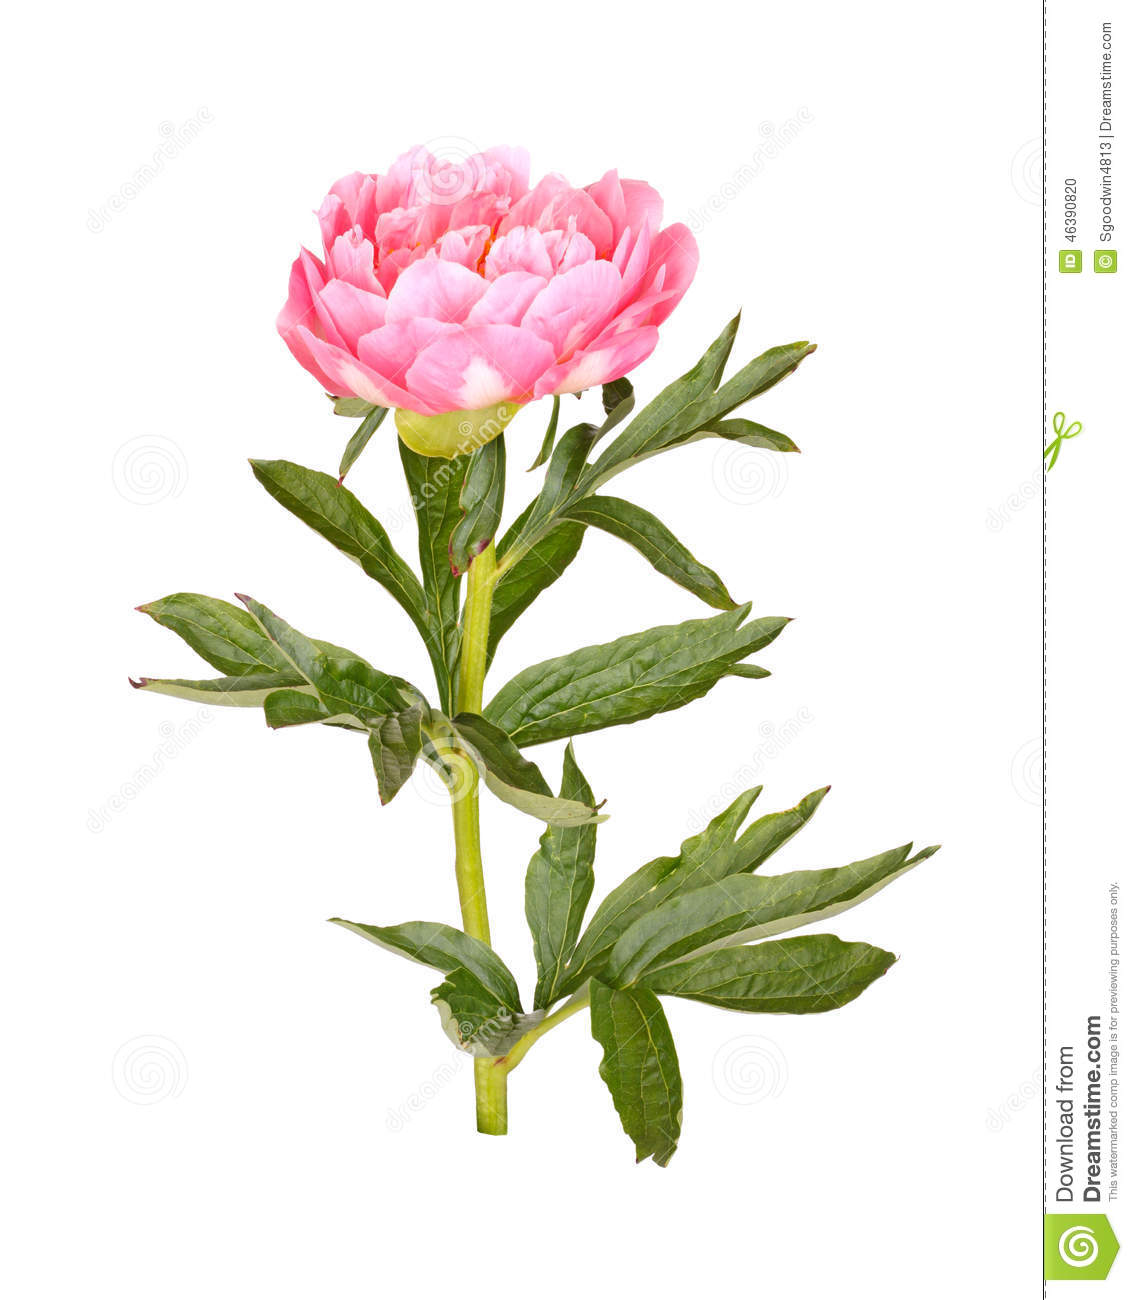 One Double Flower Stem And Leaves Of A Pink Peony  Paeonia Lactiflora